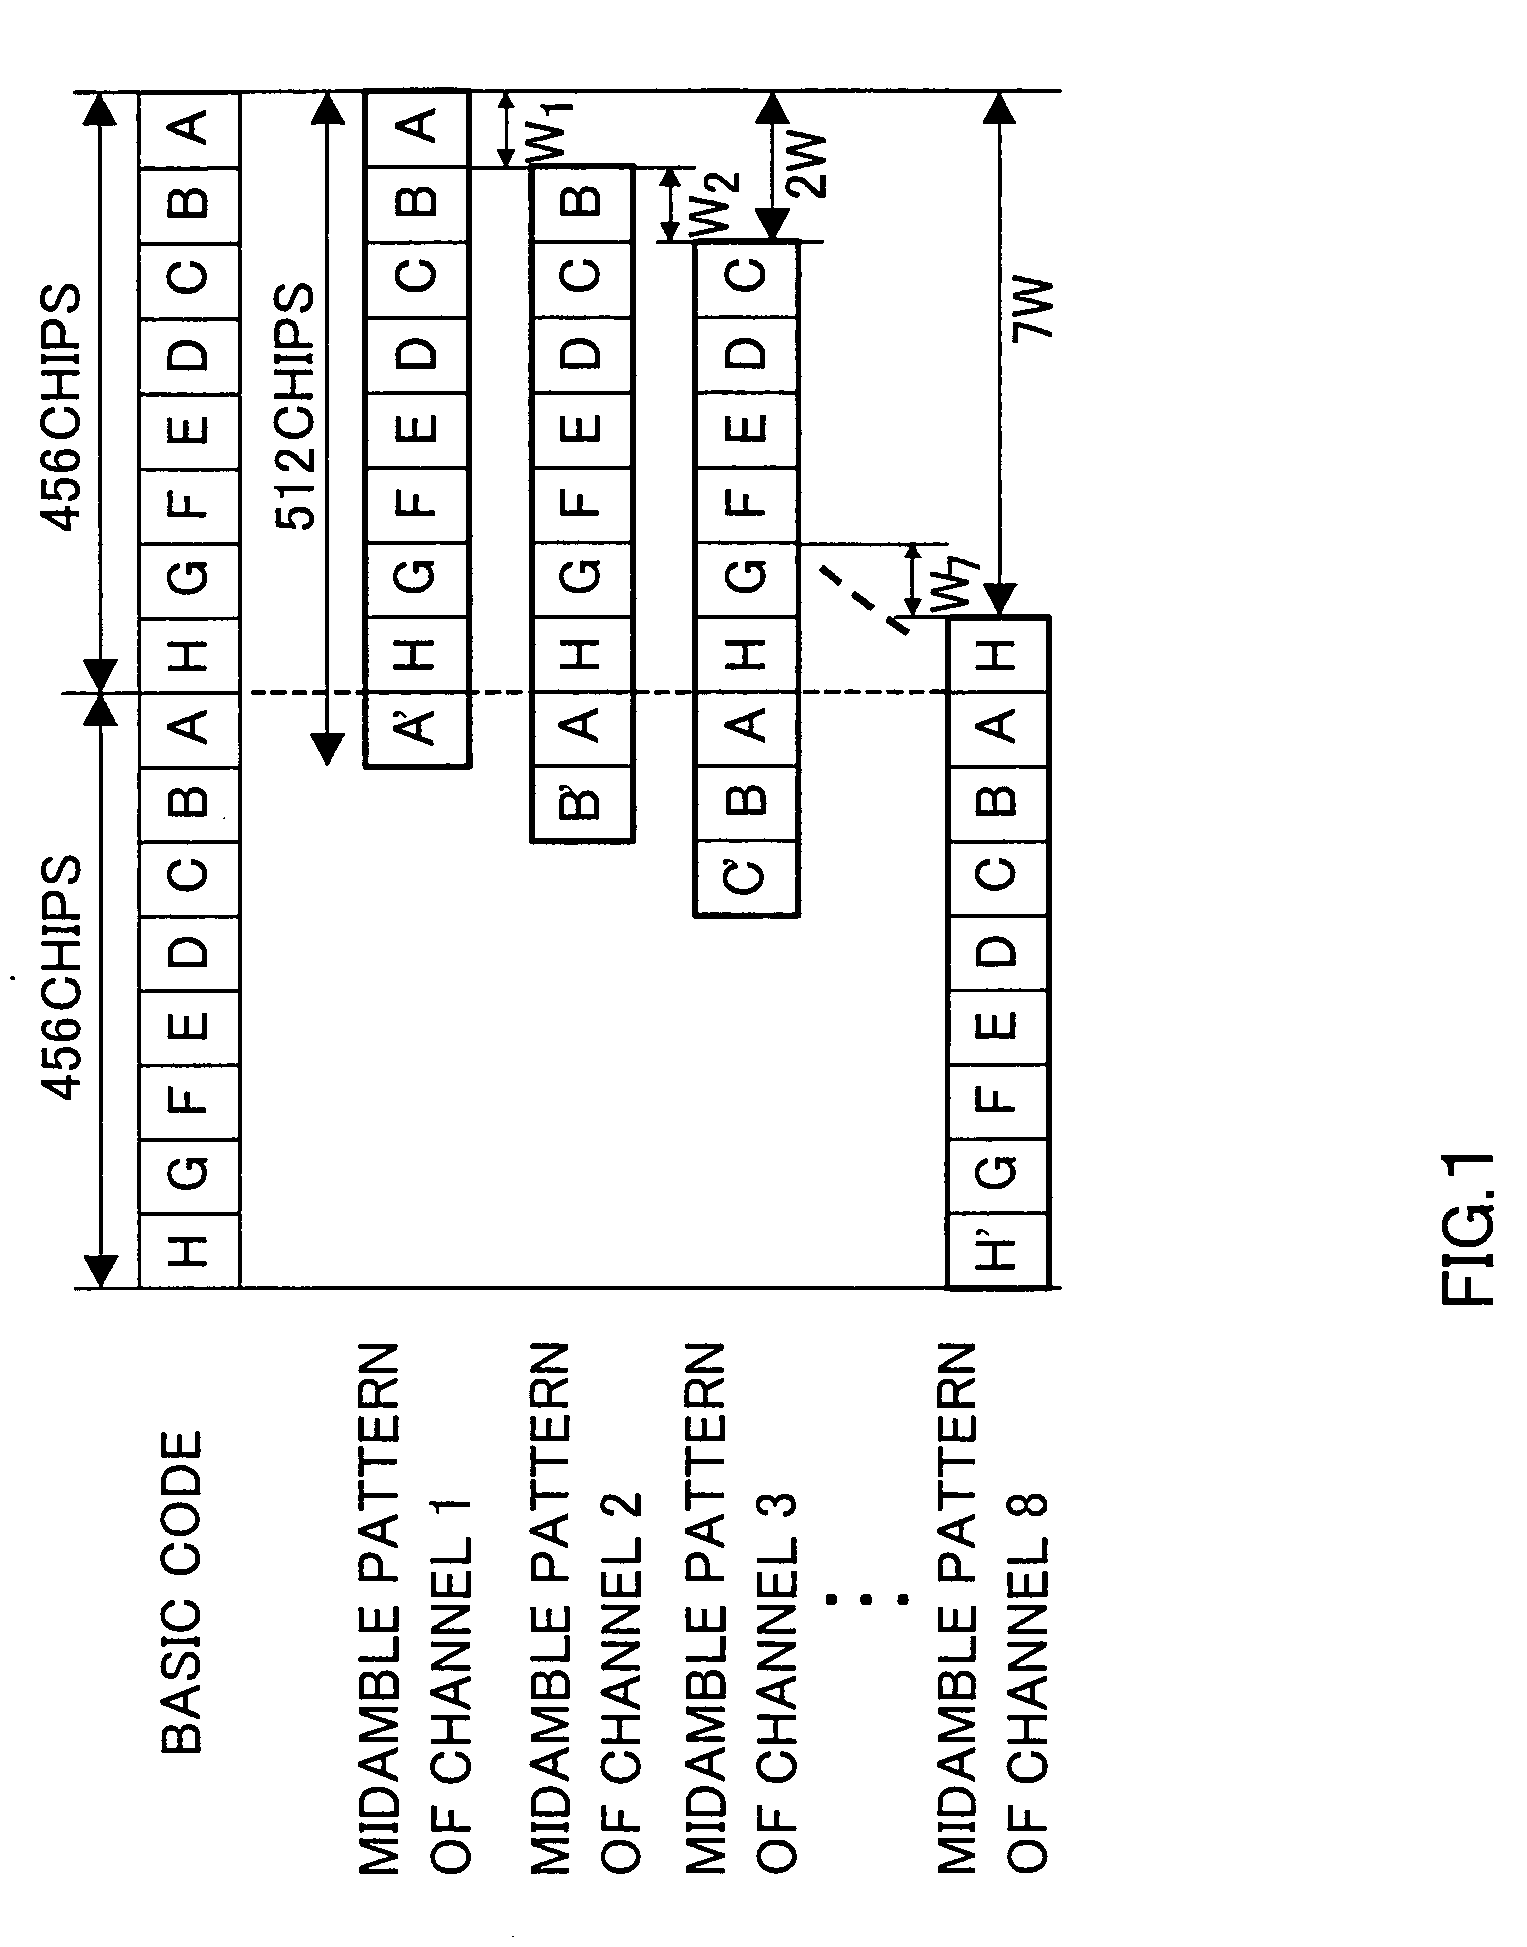 Apparatus and Method for Transmission